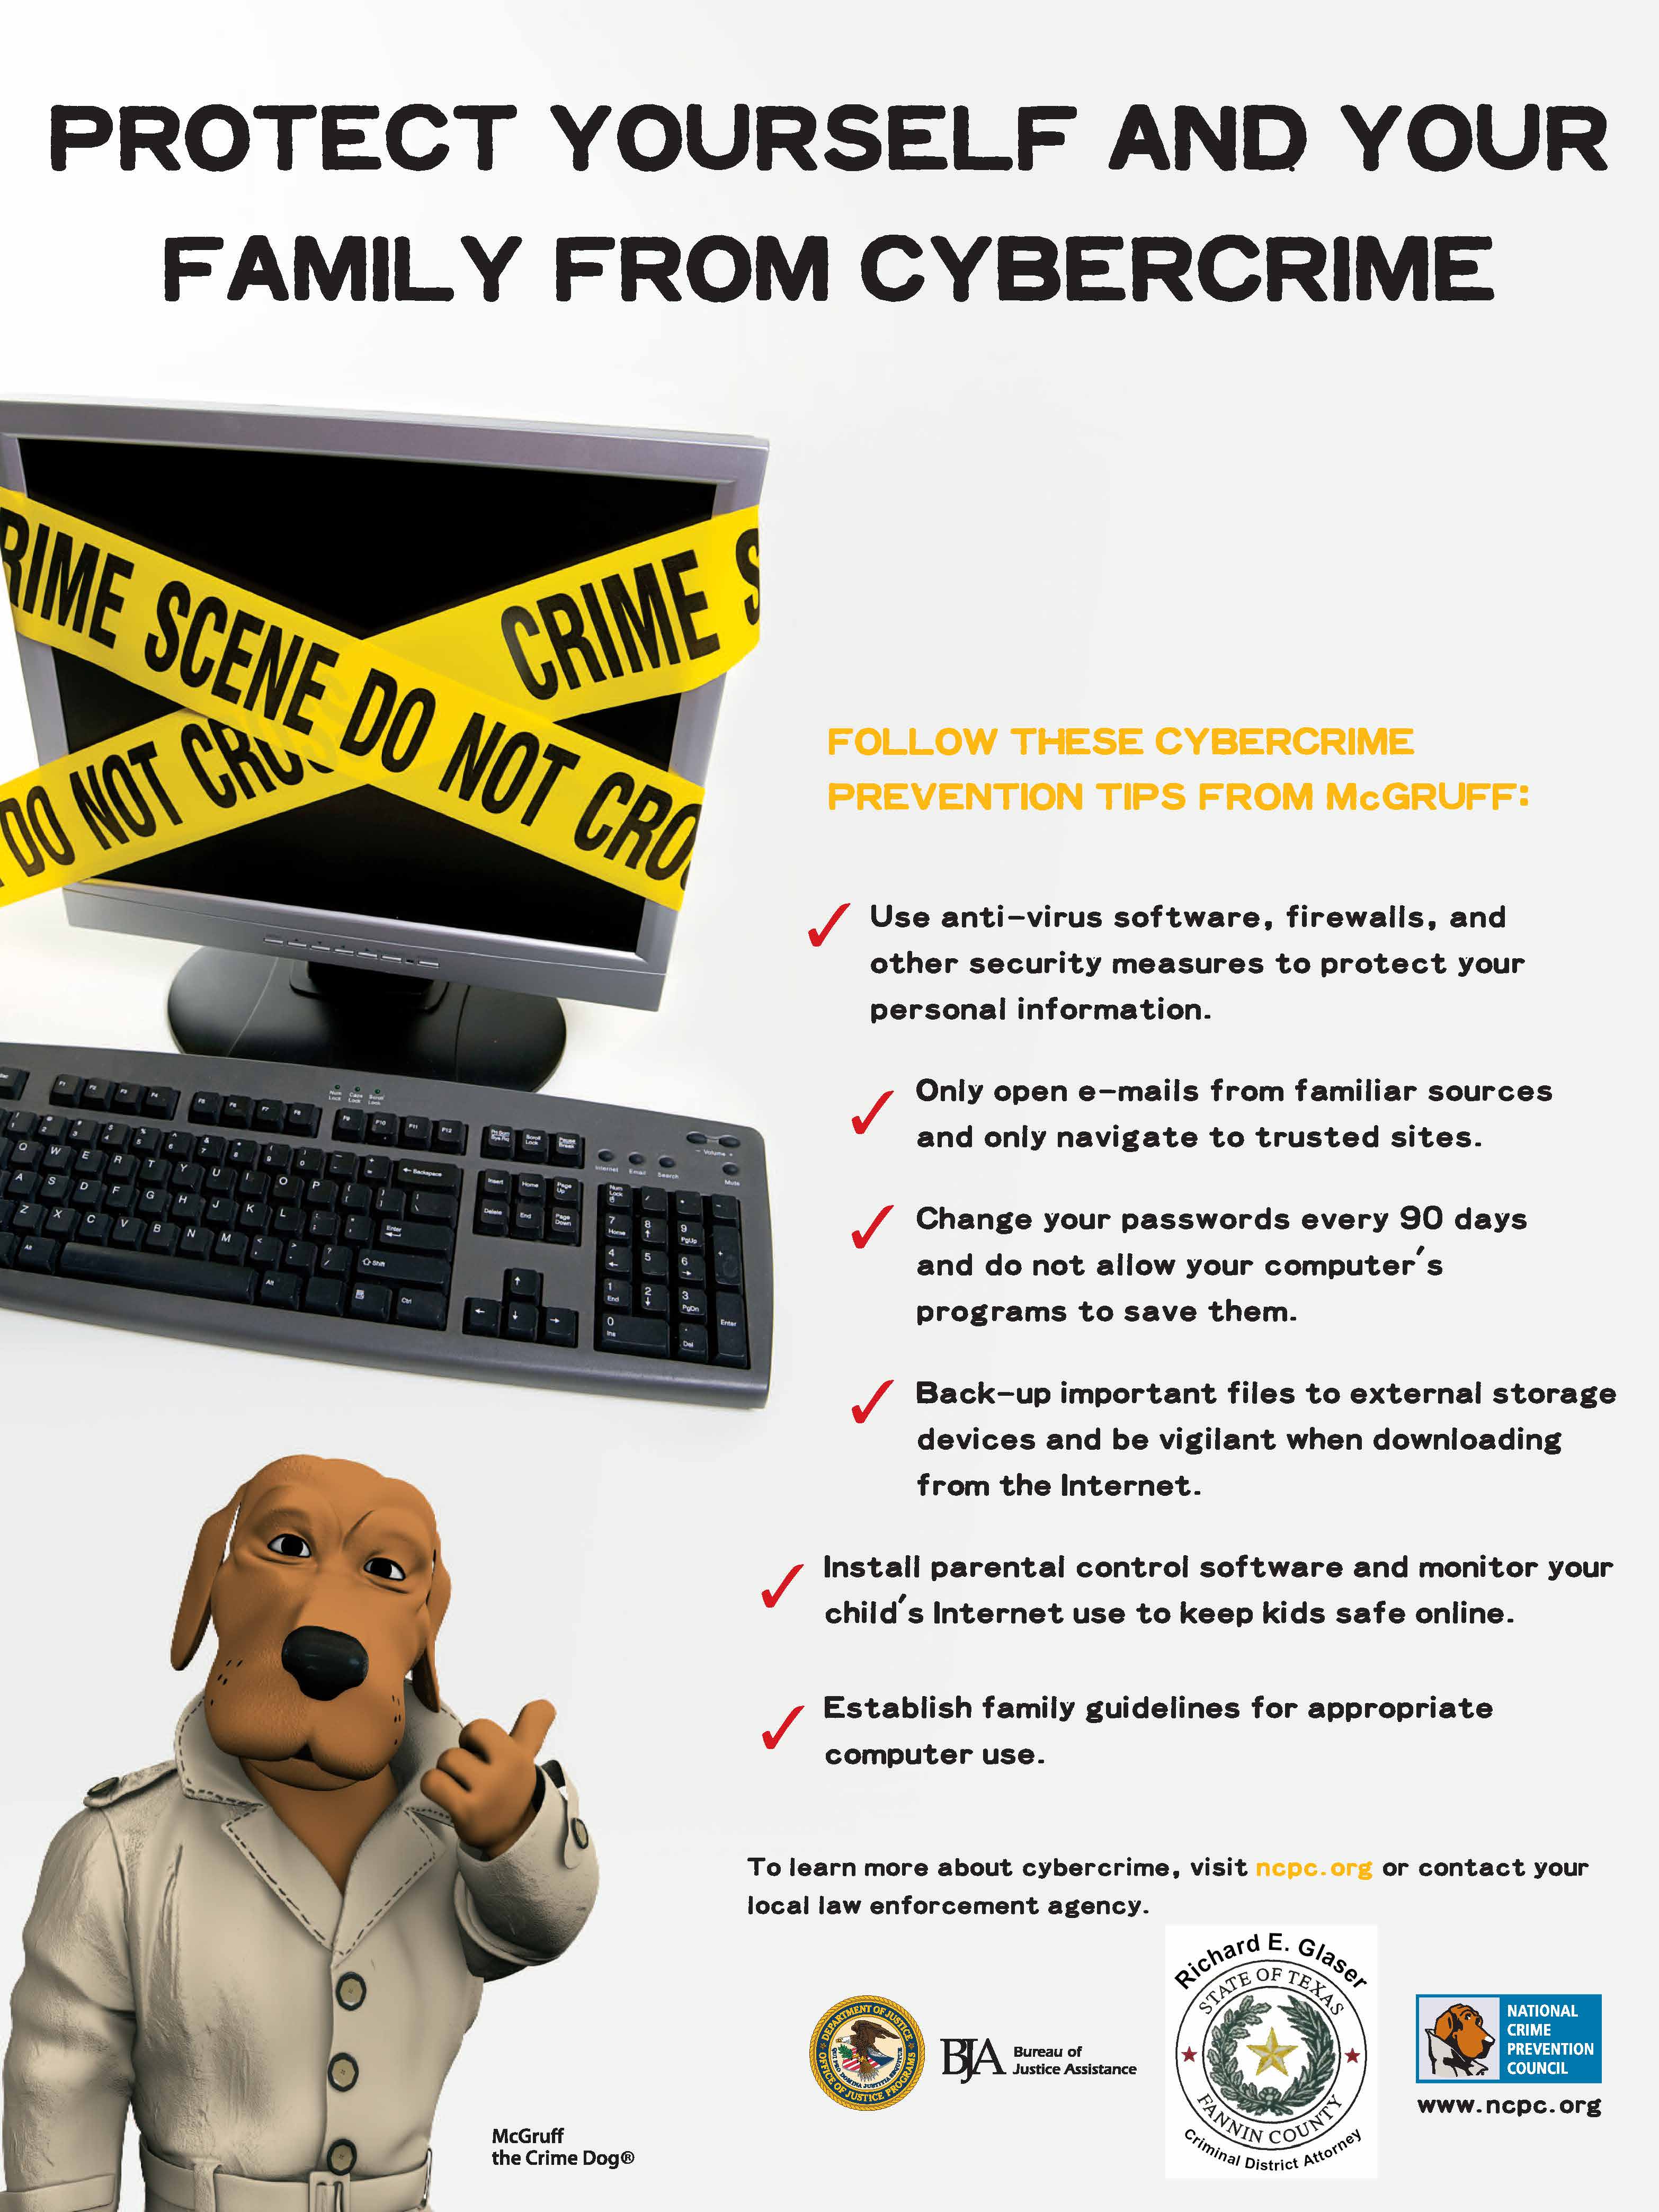 How To Prevent Cyber Crime